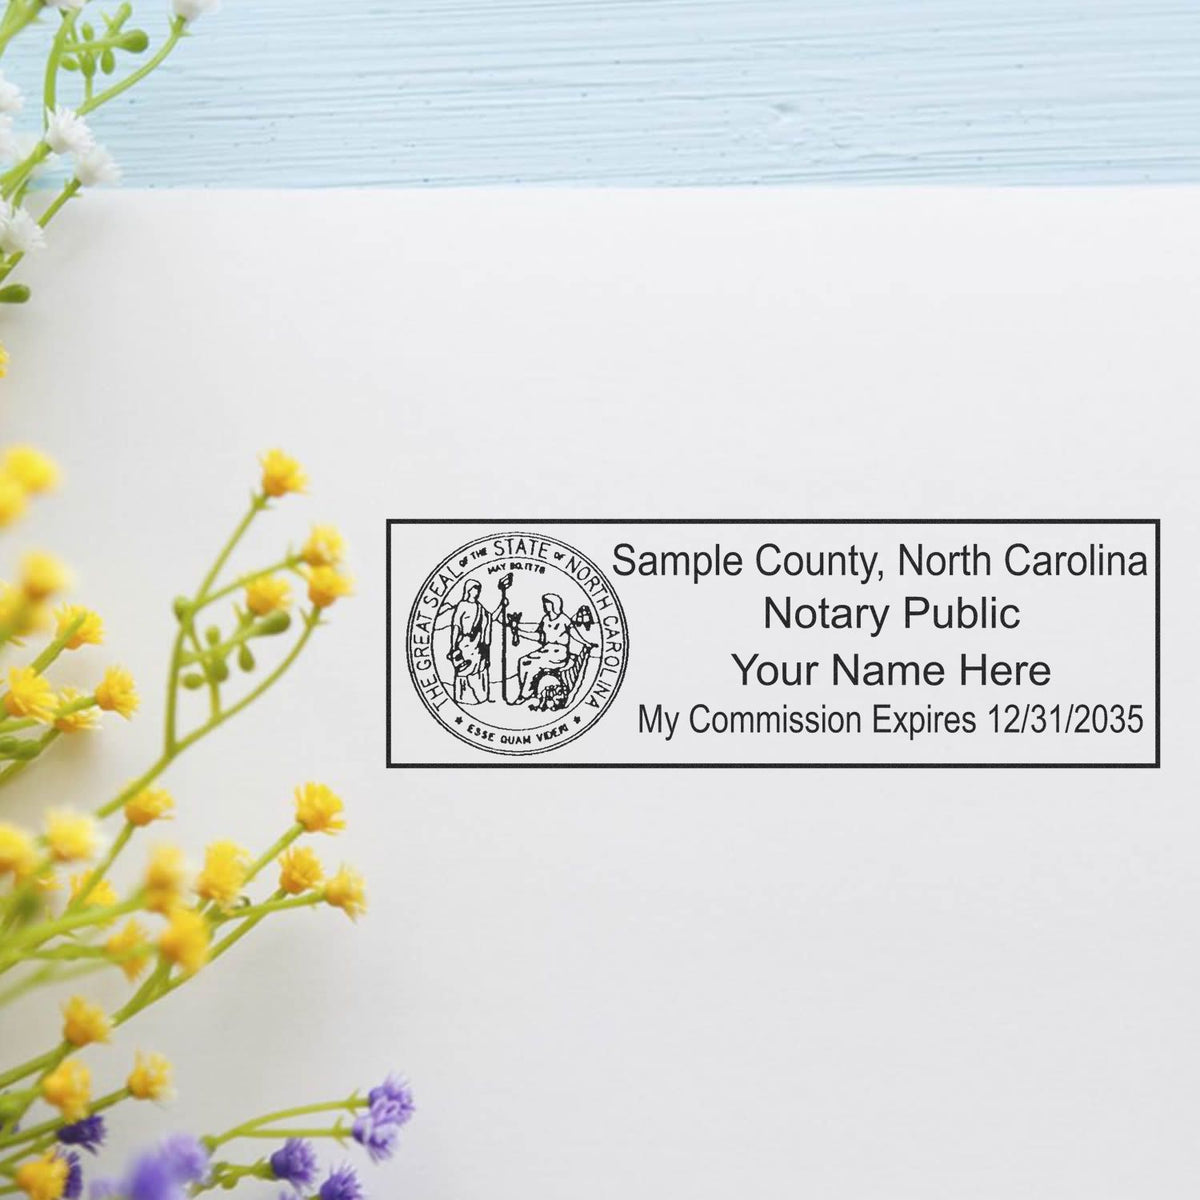 This paper is stamped with a sample imprint of the Super Slim North Carolina Notary Public Stamp, signifying its quality and reliability.